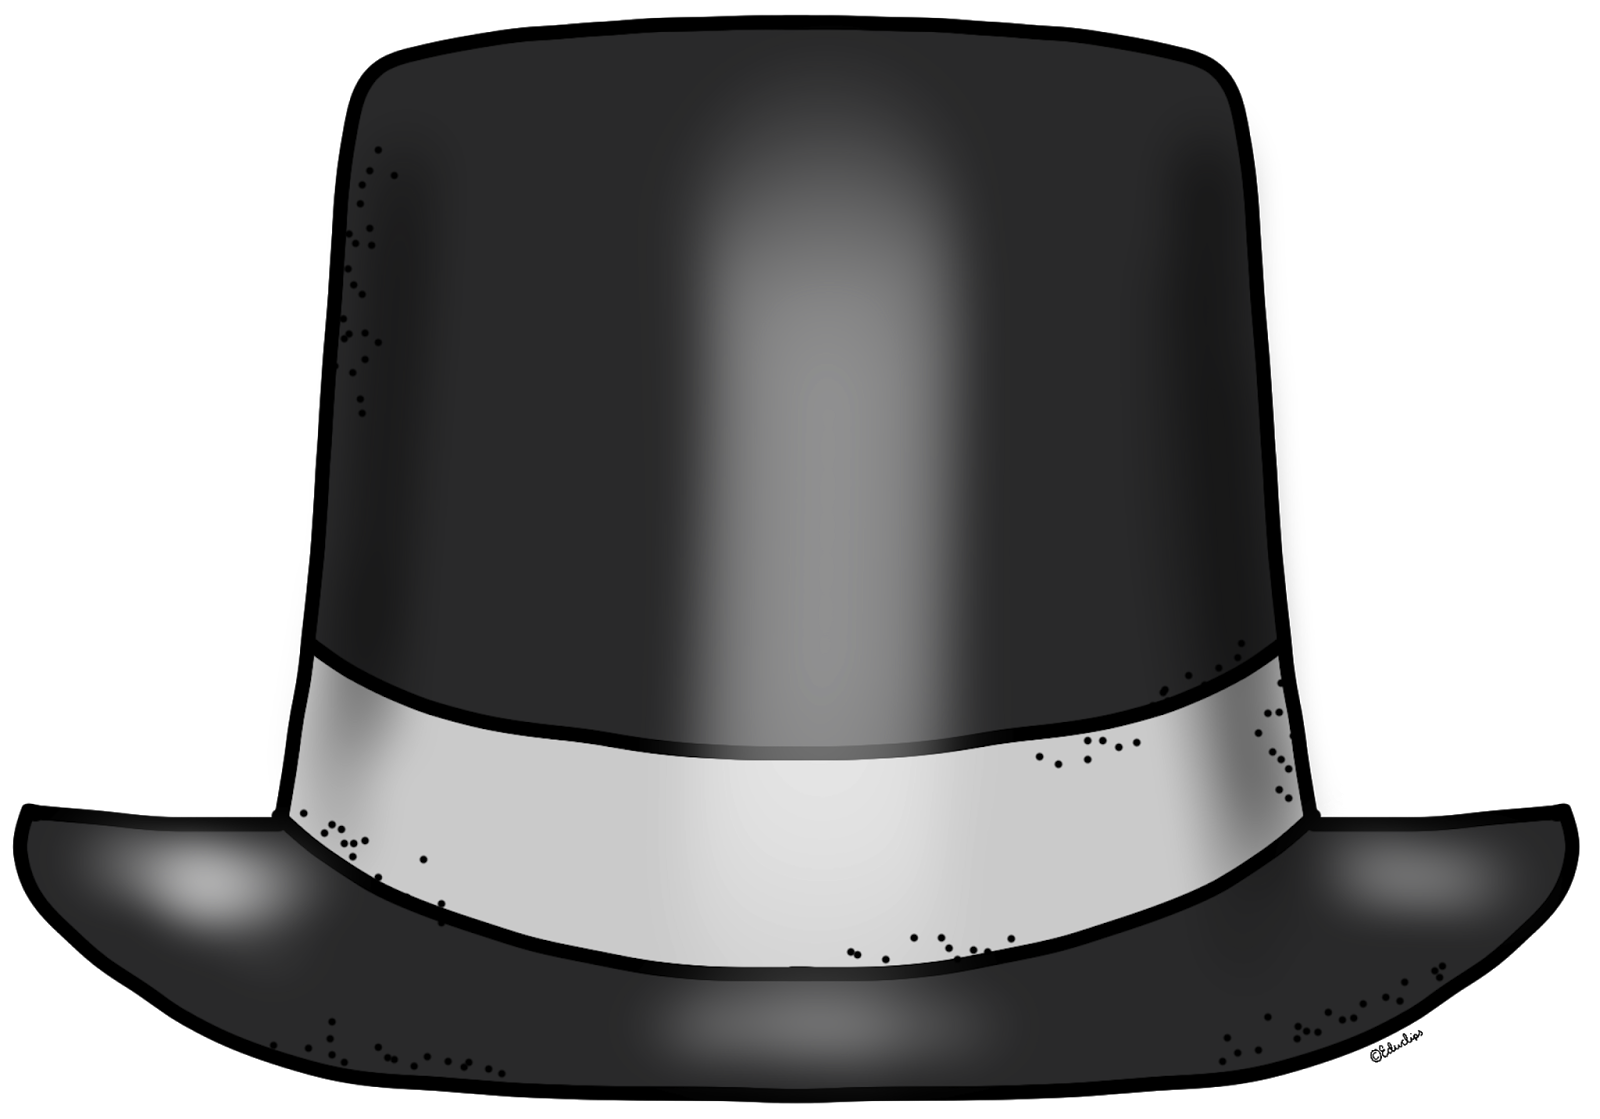 new years top hat clipart - photo #12